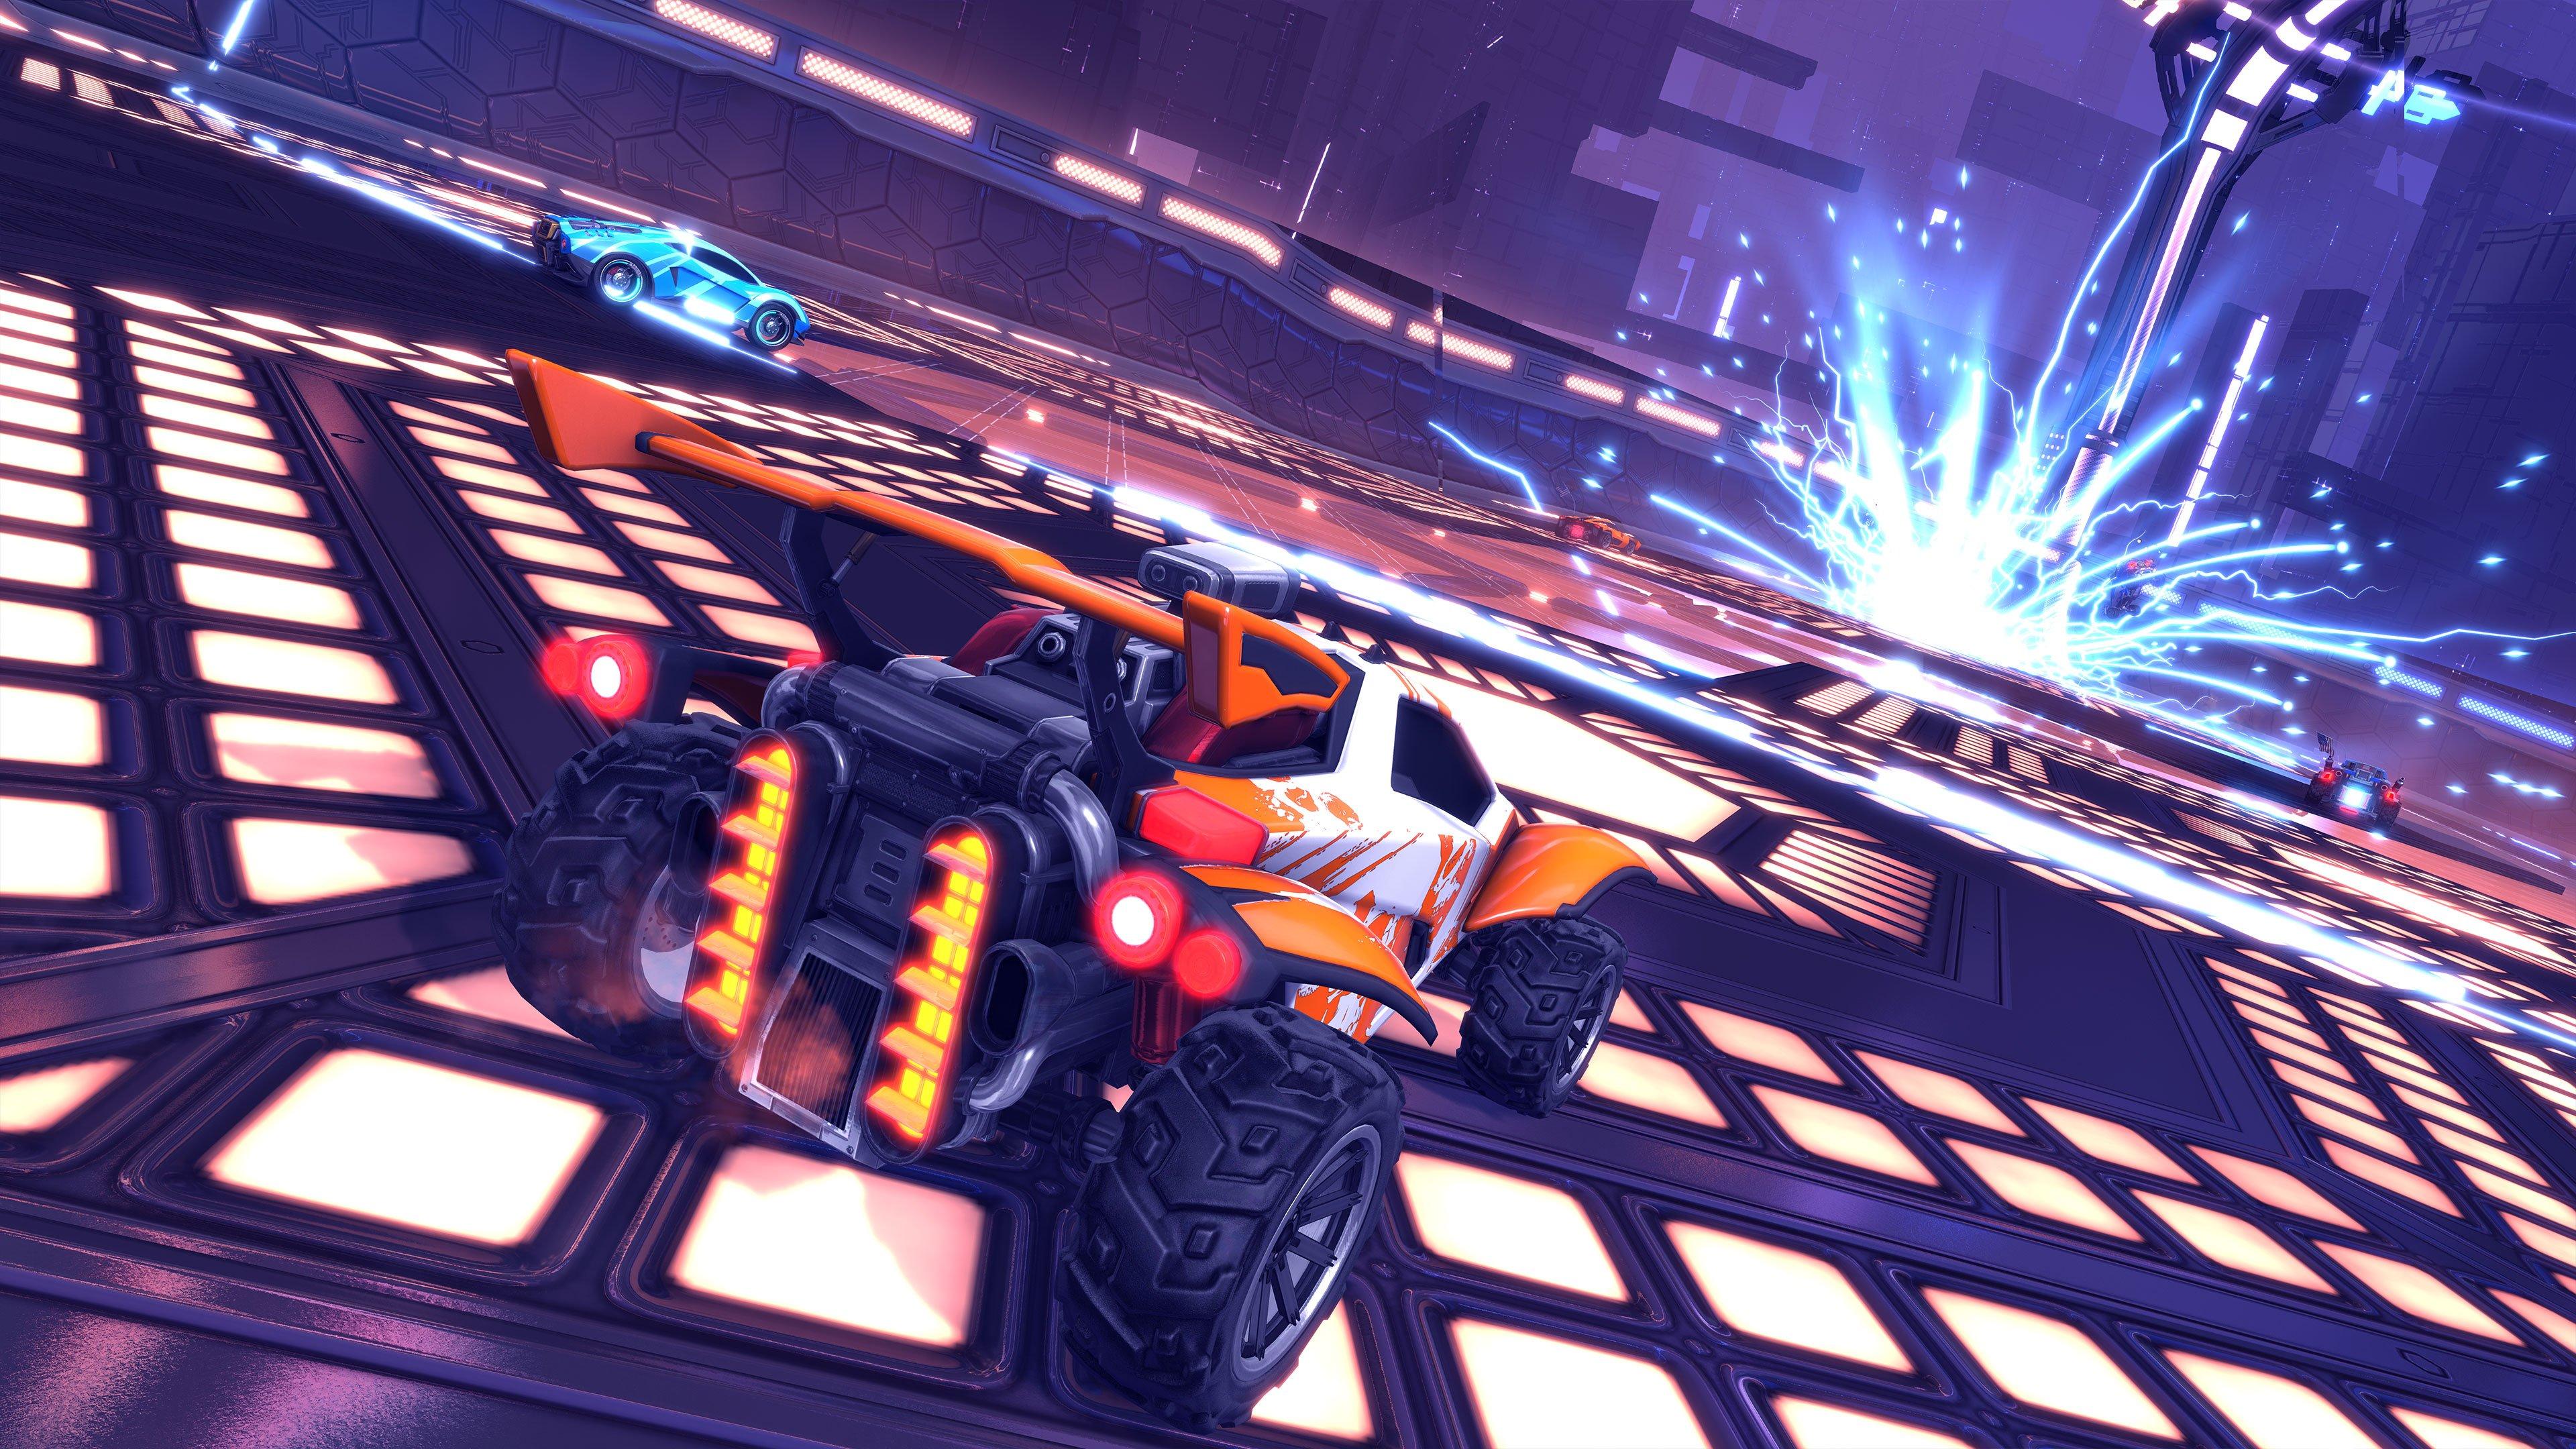 Play Rocket League for Free This Weekend on Xbox and Steam